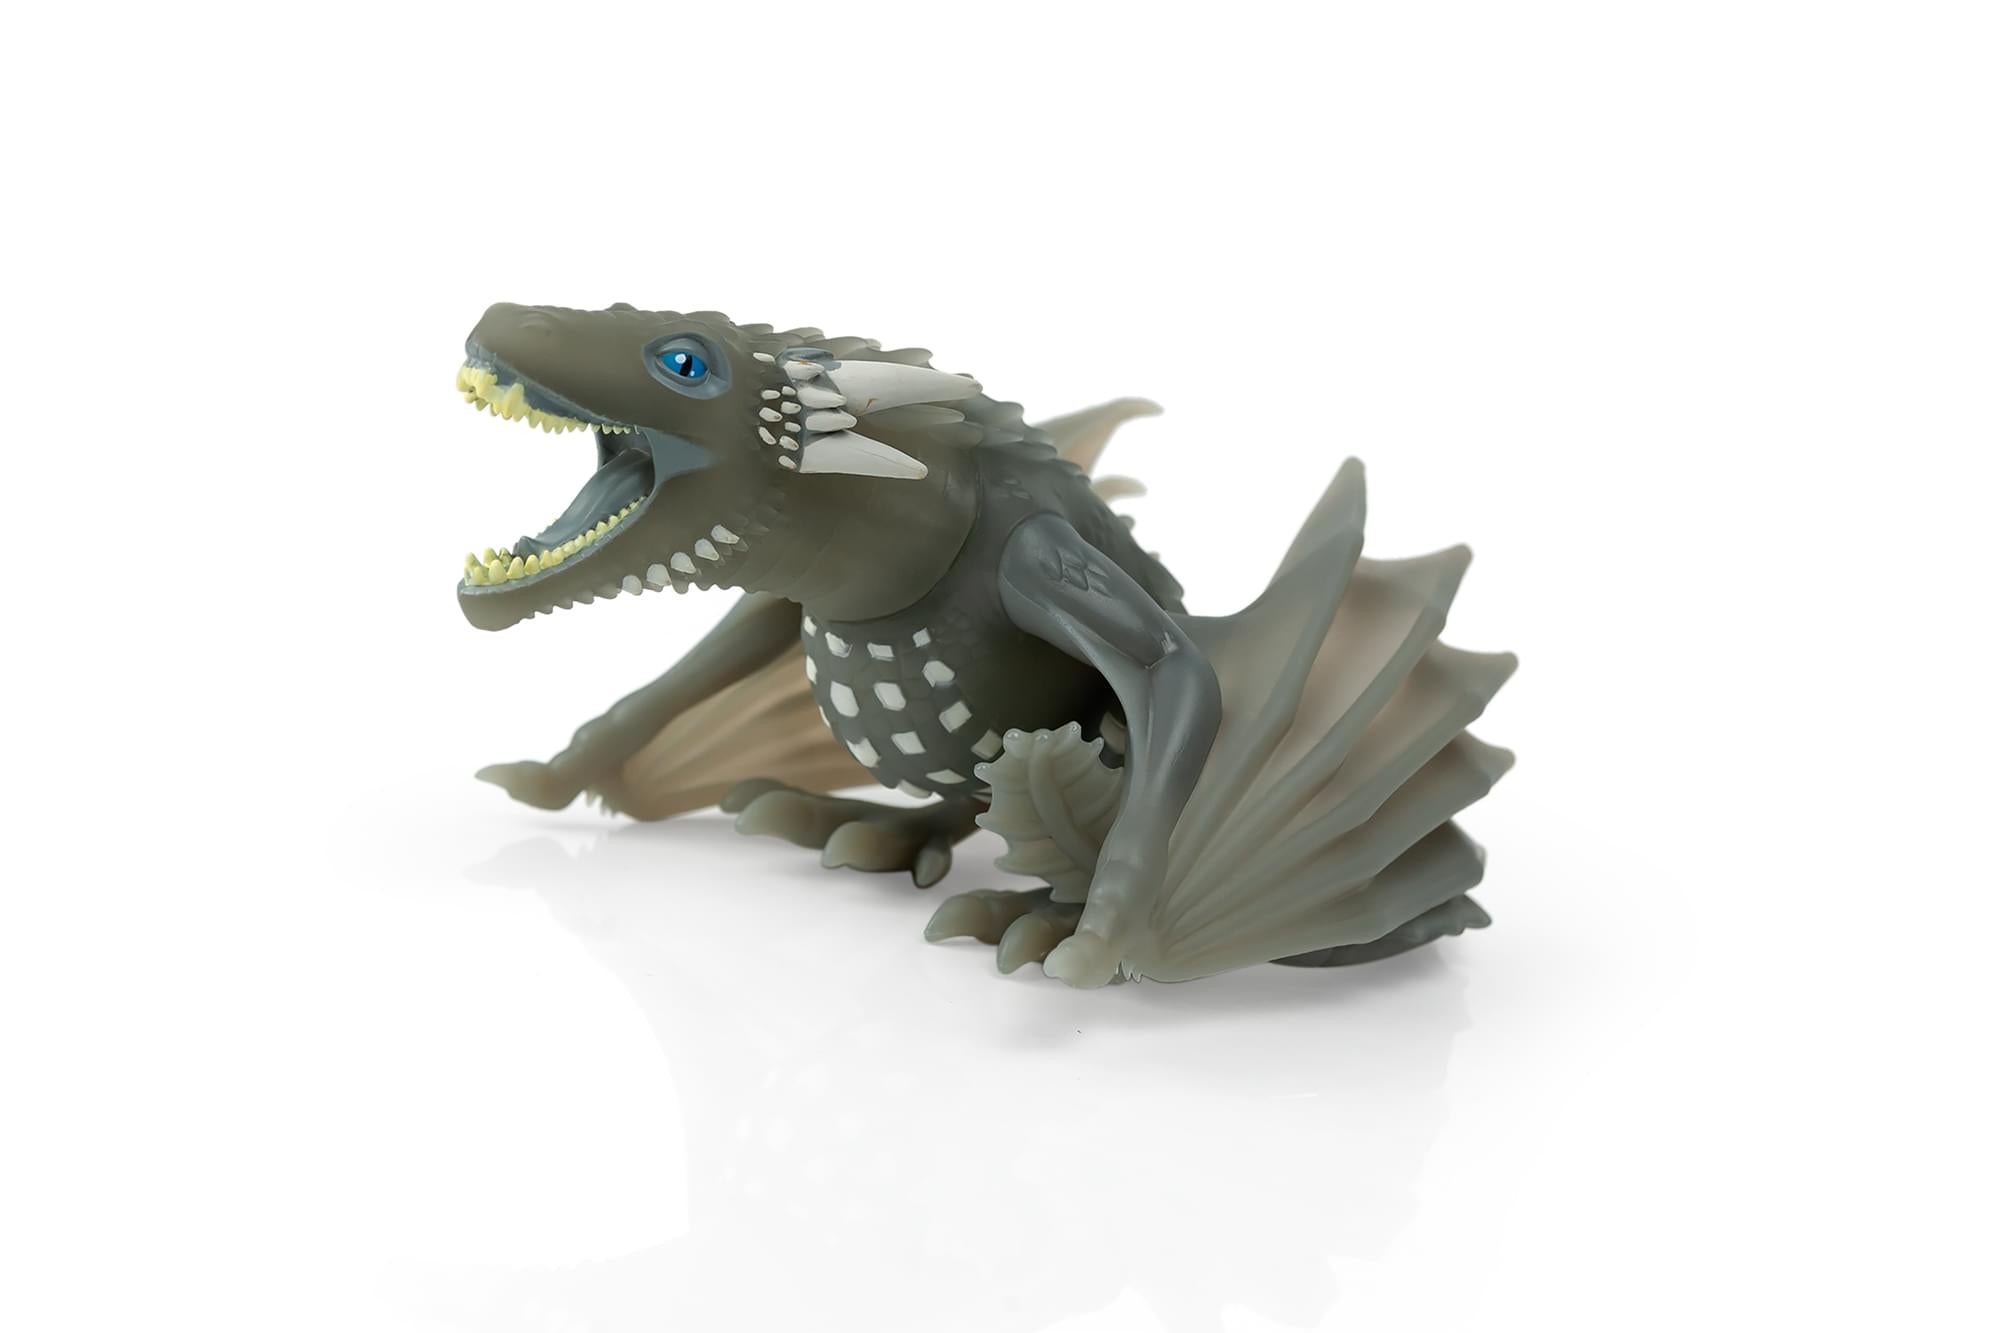 TITANS Game Of Thrones Wight Viserion Collectible Figure , Measures 4.5 Inches